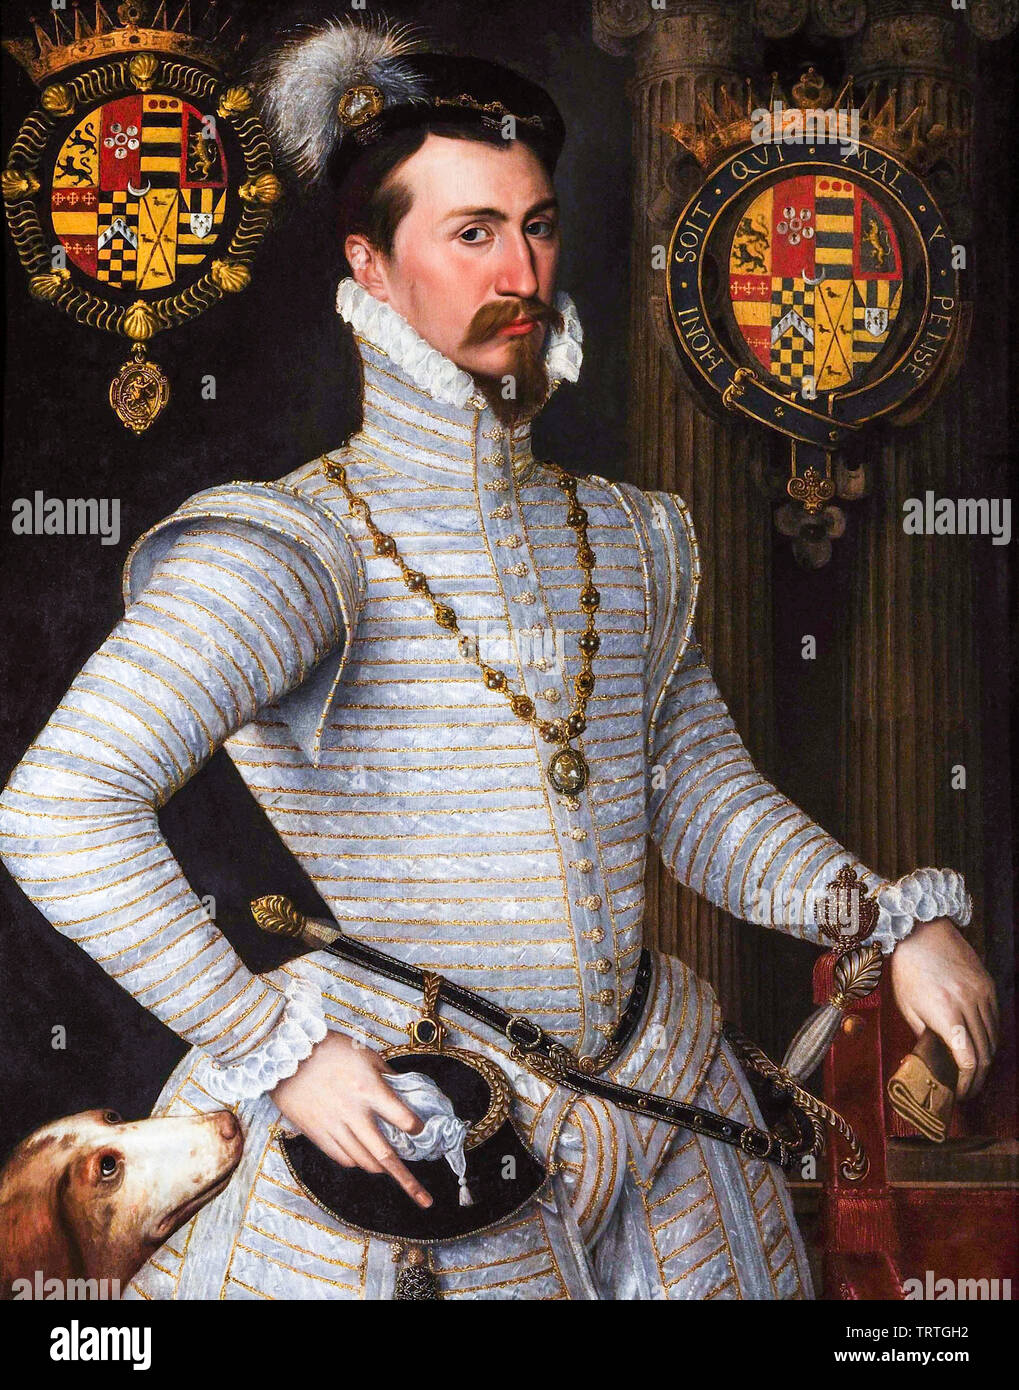 Robert Dudley, 1st Earl of Leicester, 1532-1588, portrait painting, circa 1564 Stock Photo